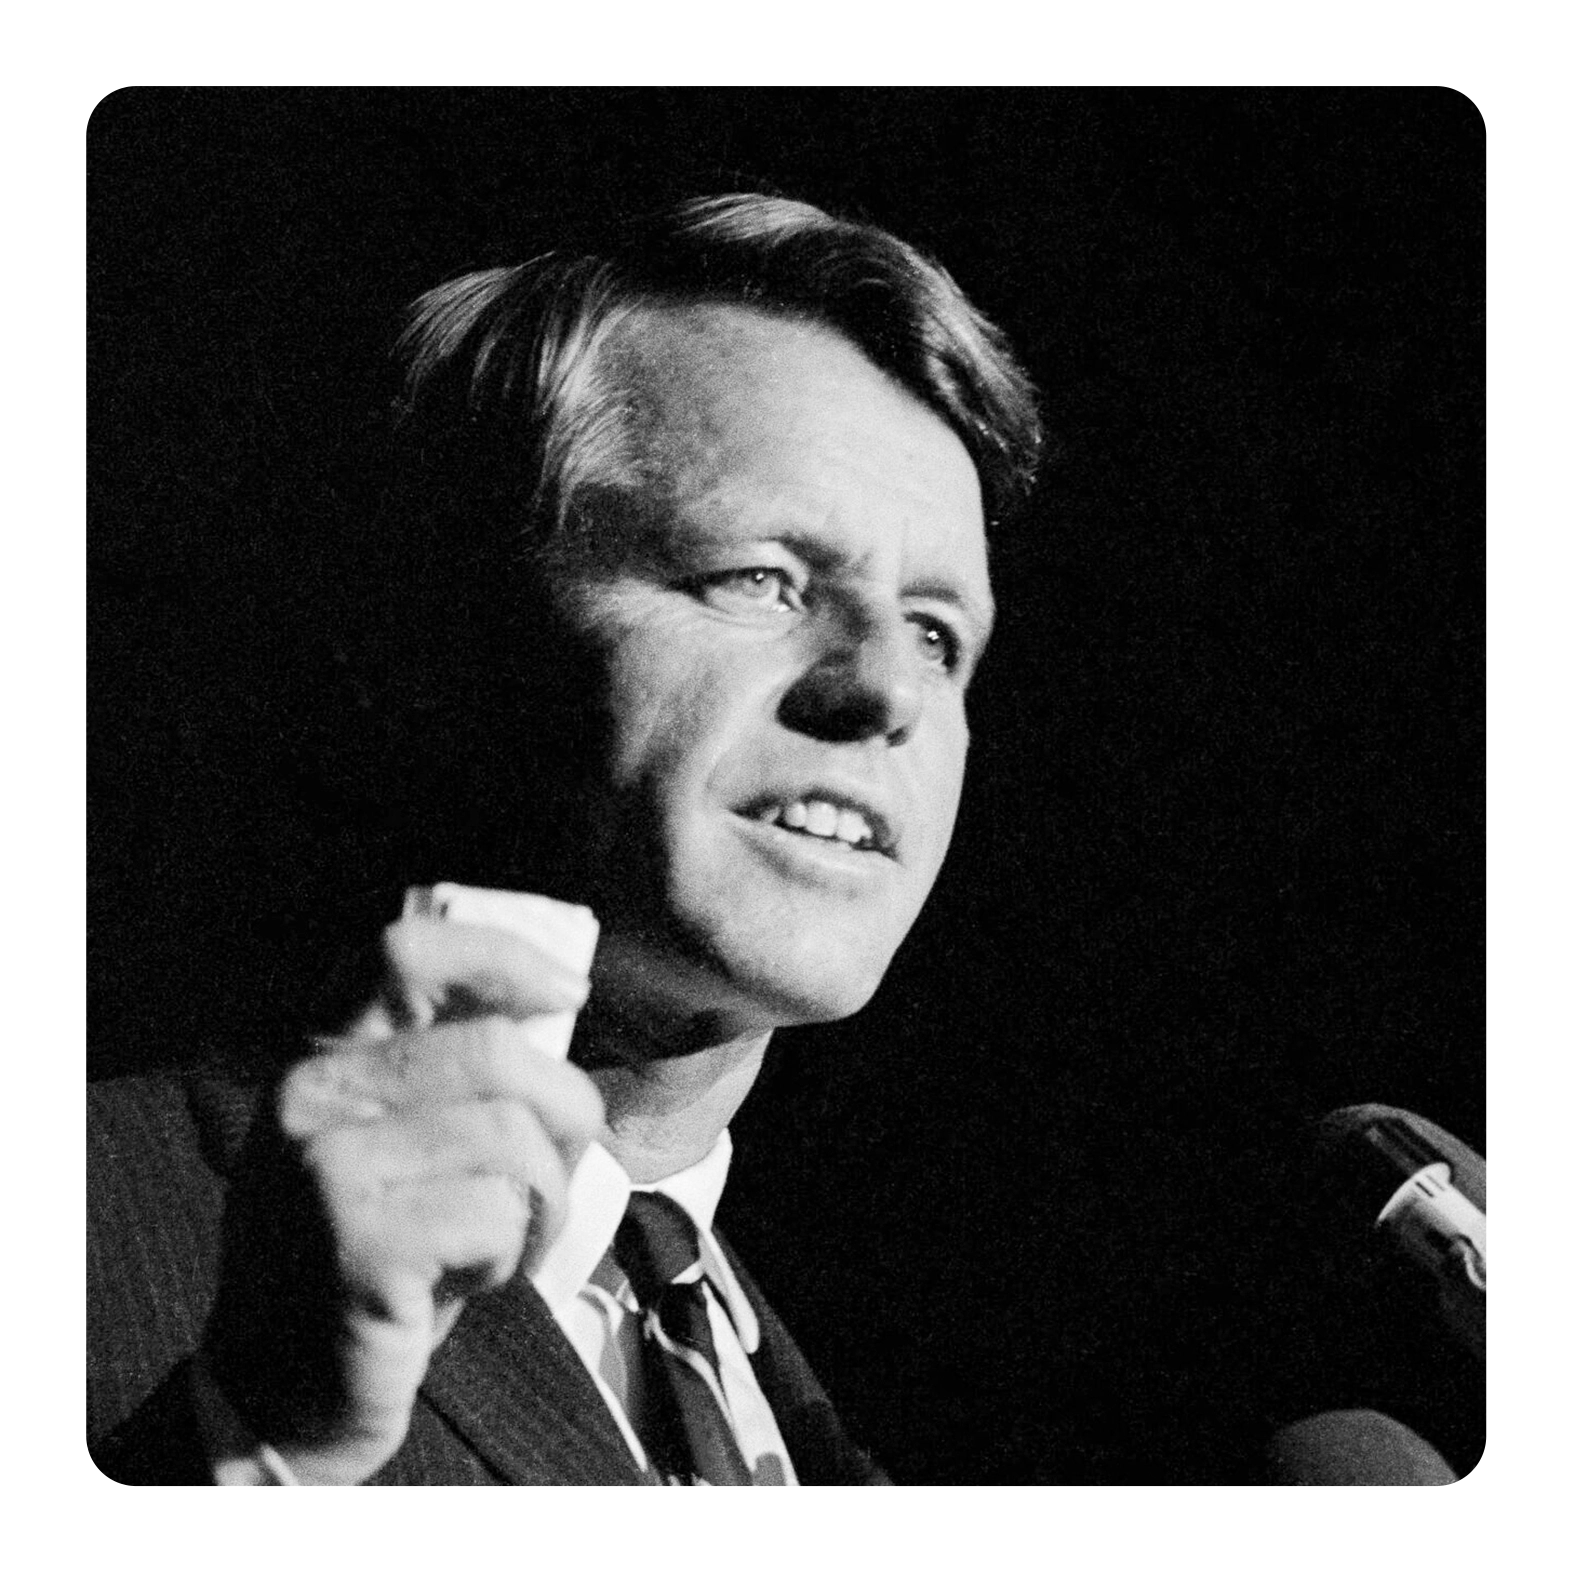 Archival image of Robert F Kennedy delivering a speech. The image is rendered in a stark black and white.